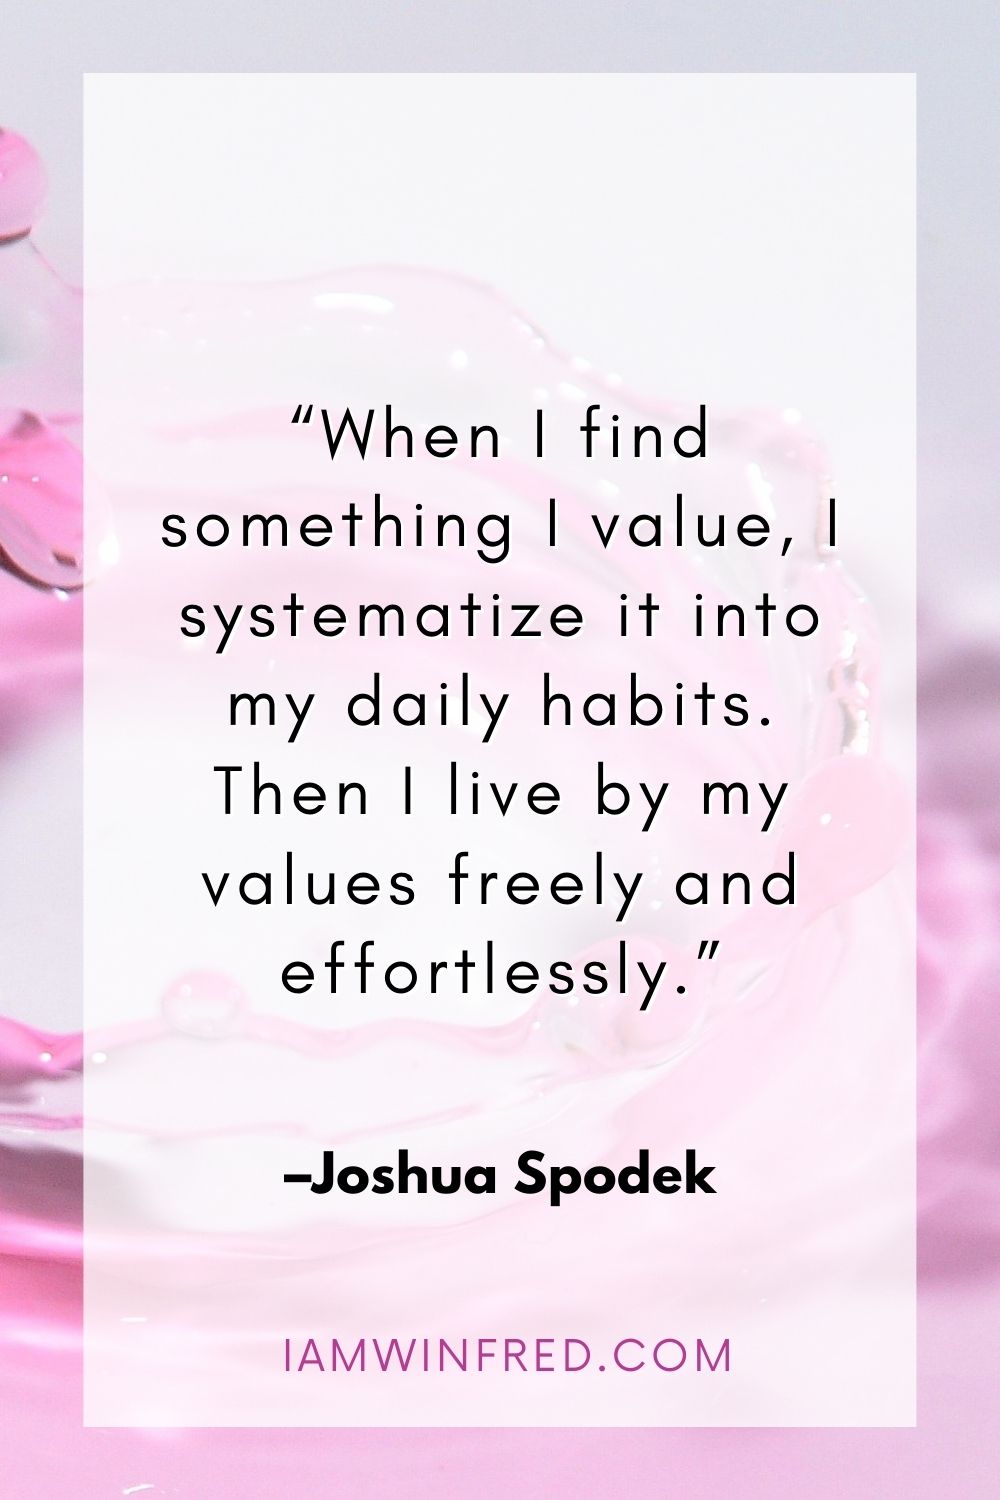 When I Find Something I Value I Systematize It Into My Daily Habits. Then I Live By My Values Freely And Effortlessly.